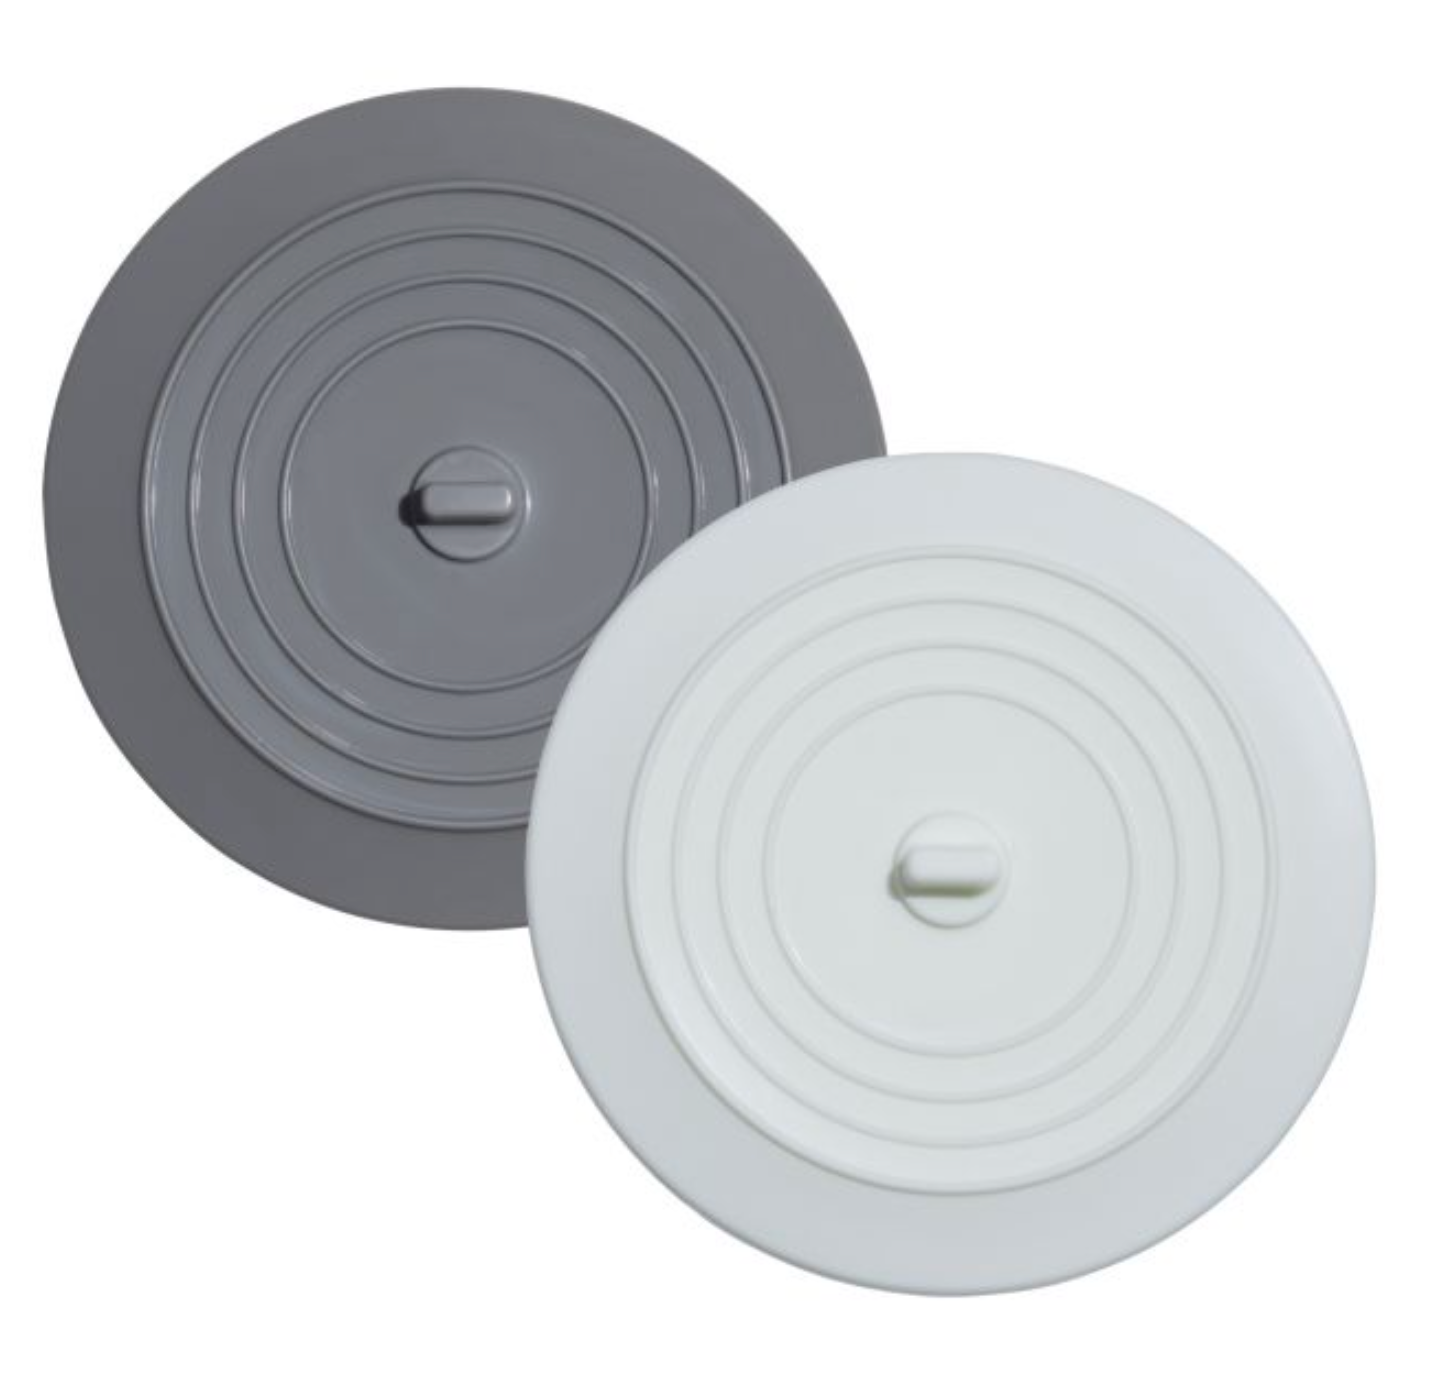 Kitchen Drain Stoppers – Pack of 2